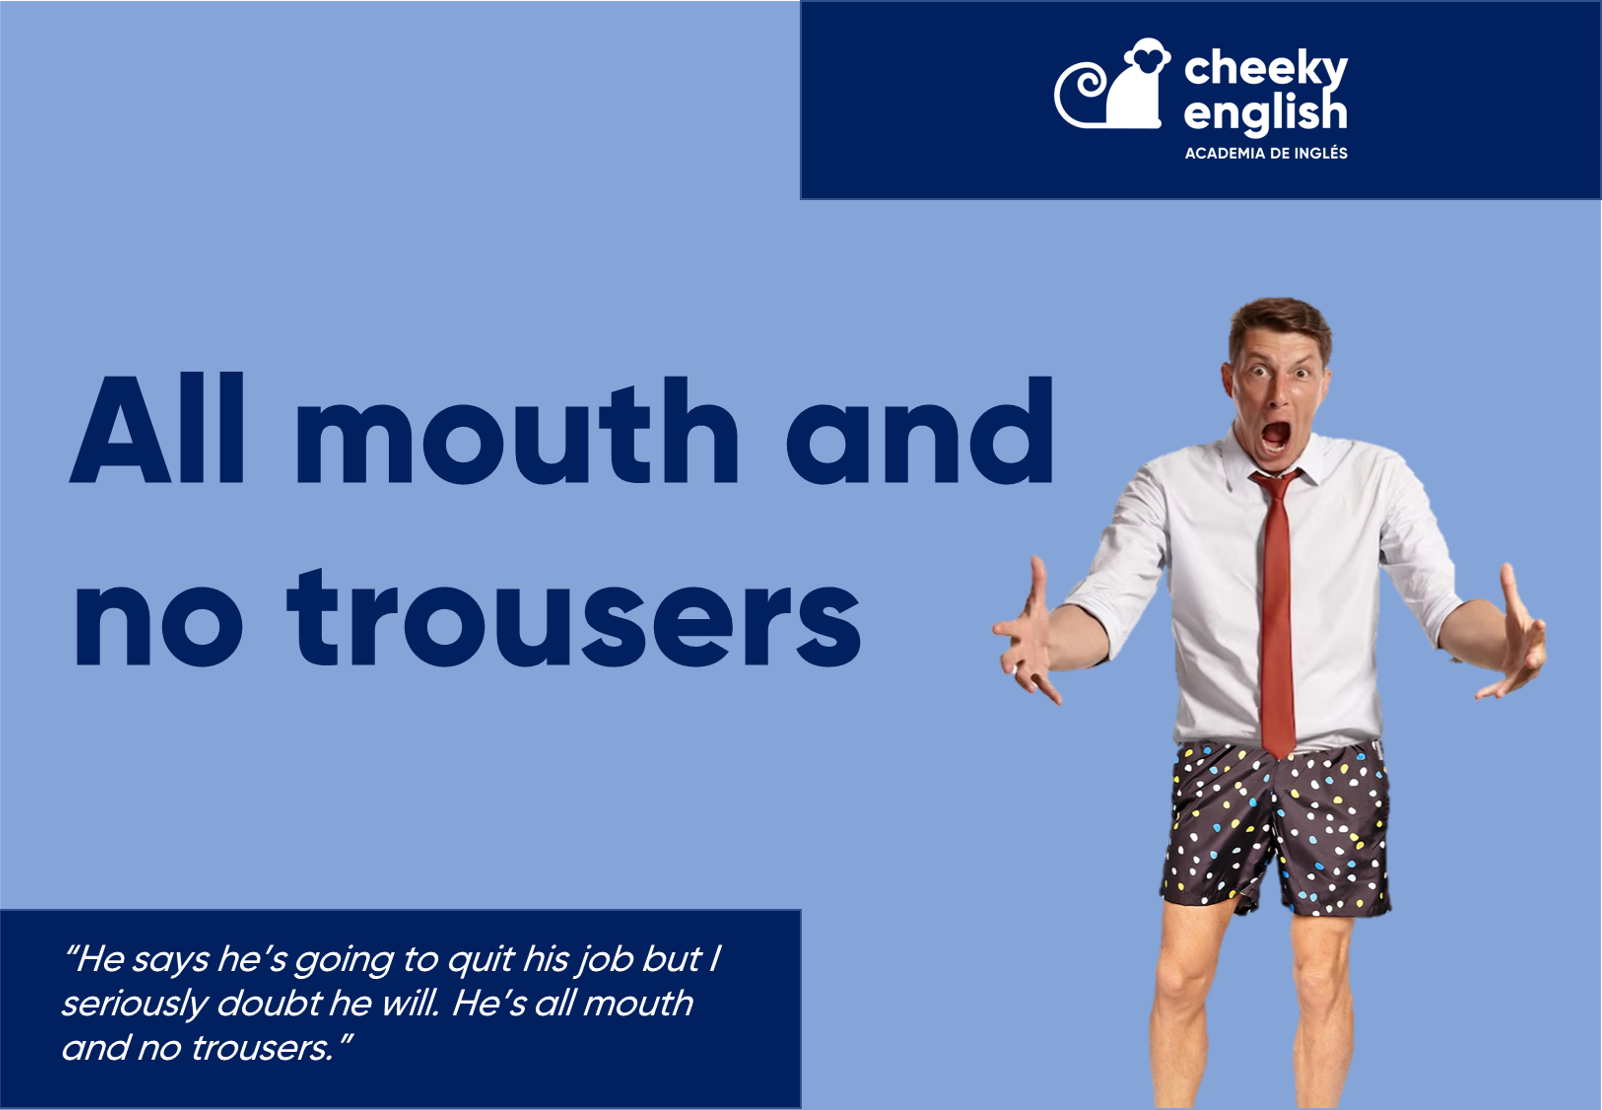 All mouth and no trousers